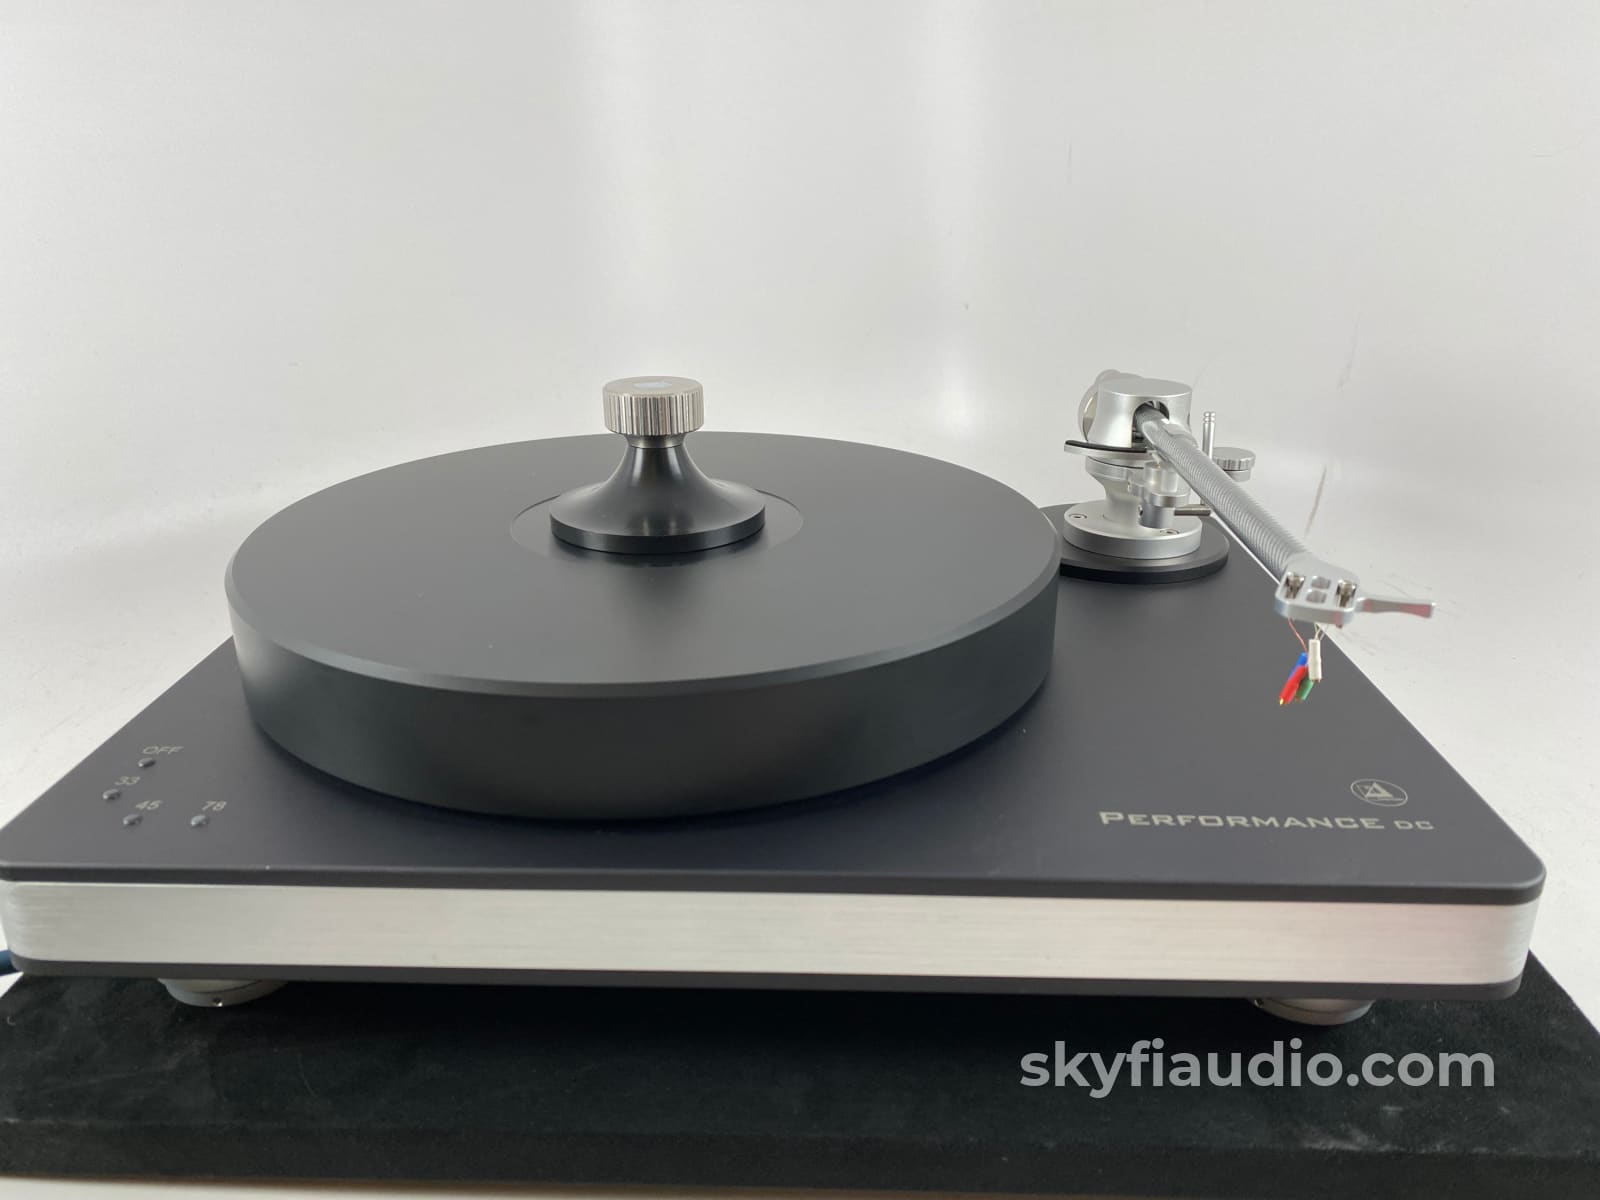 Clearaudio Performance Dc Turntable W/Tracer Tonearm And New Sumiko Cartridge